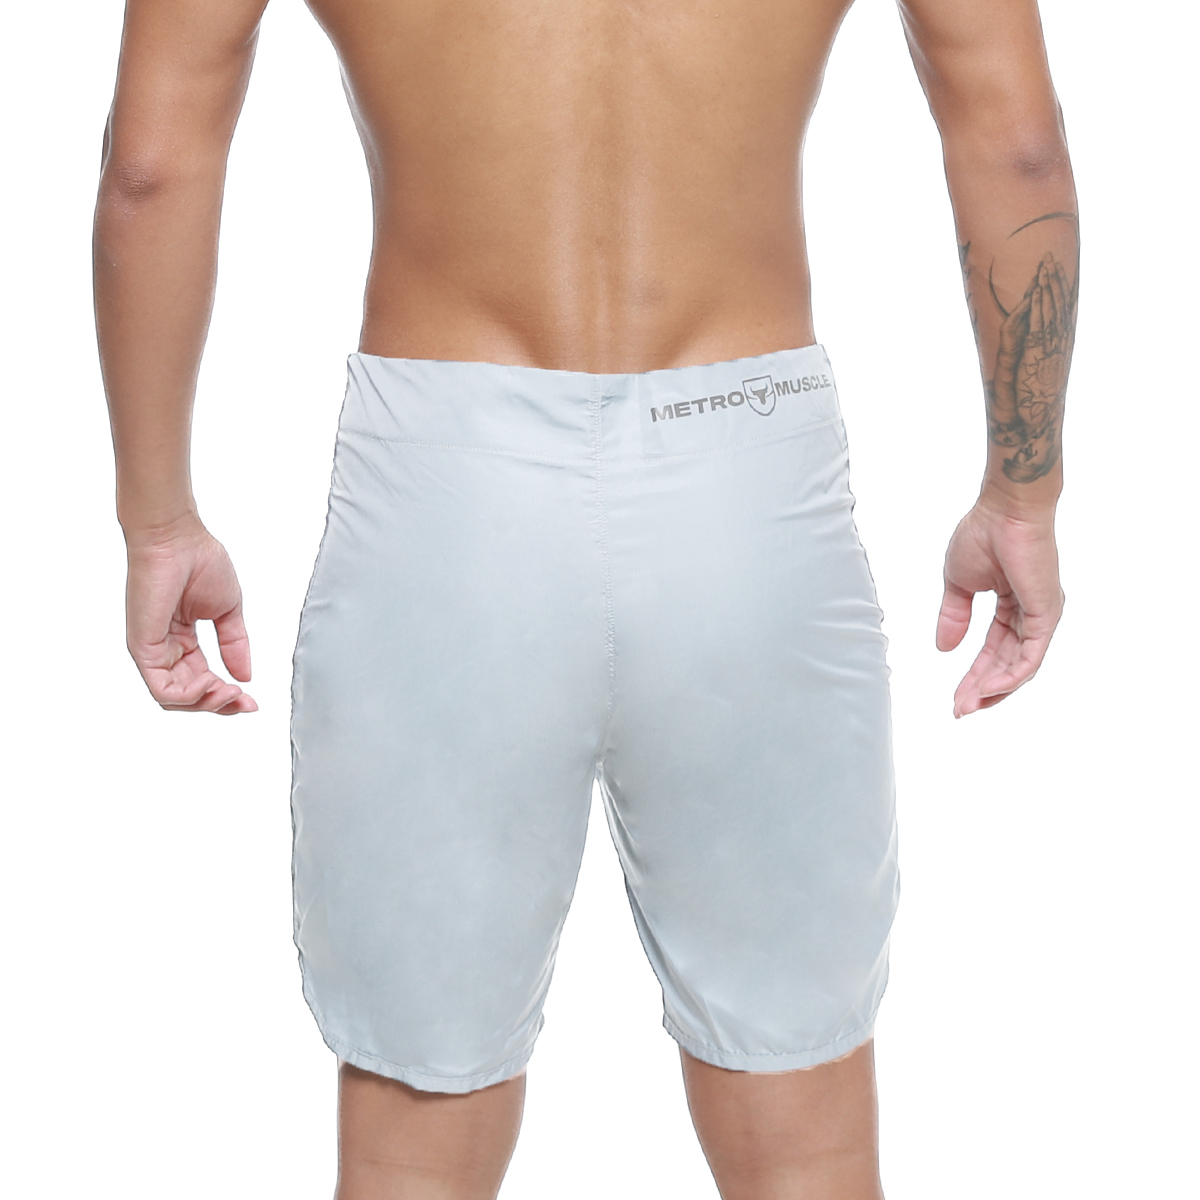 [MetroMuscleWear] Insignia Physique Board Short Gray (4716-08)